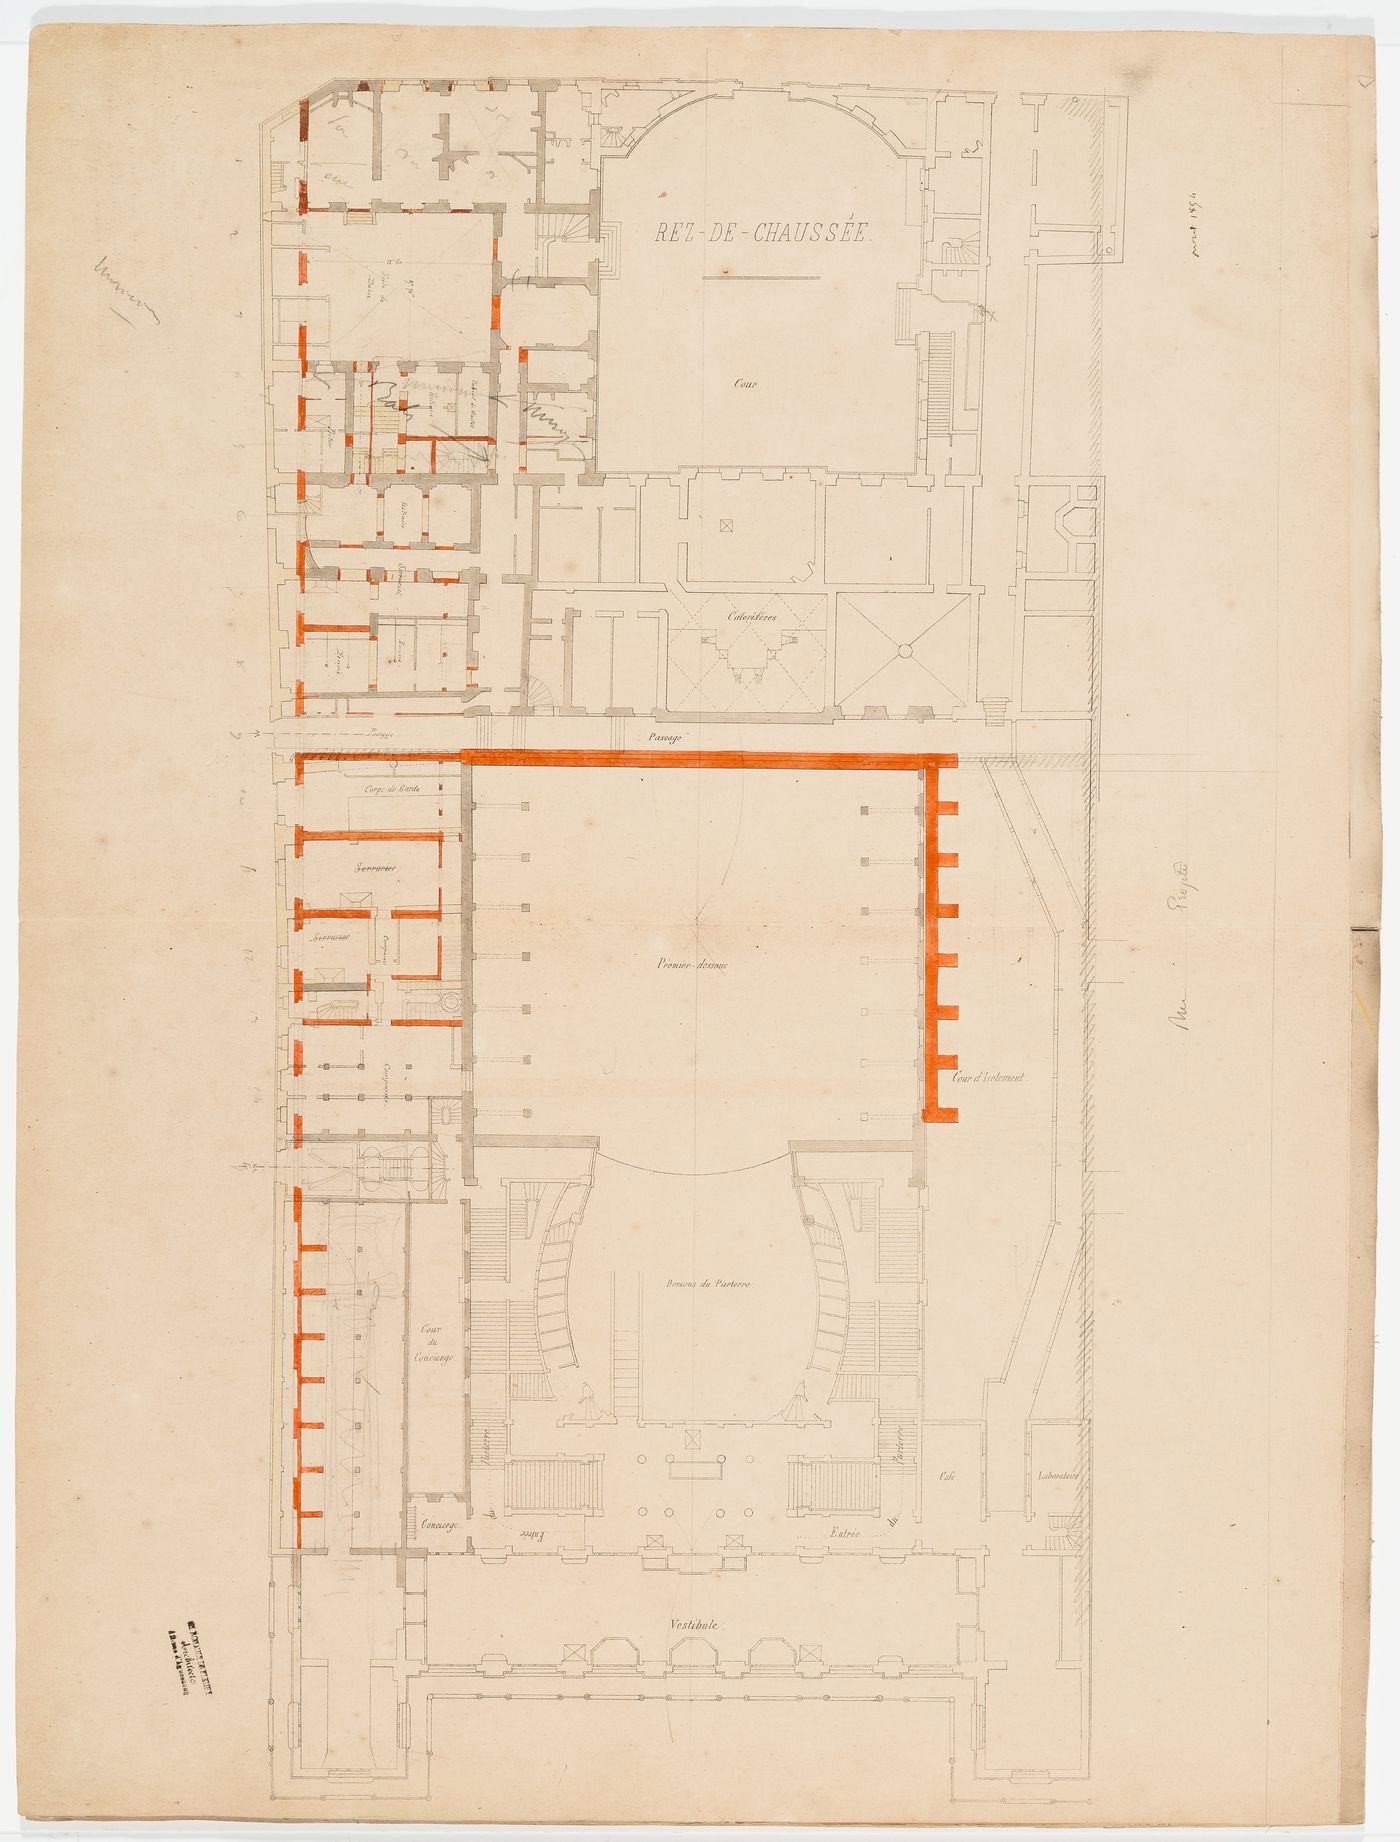 Ground floor plan of Salle Le Peletier with additions for alterations